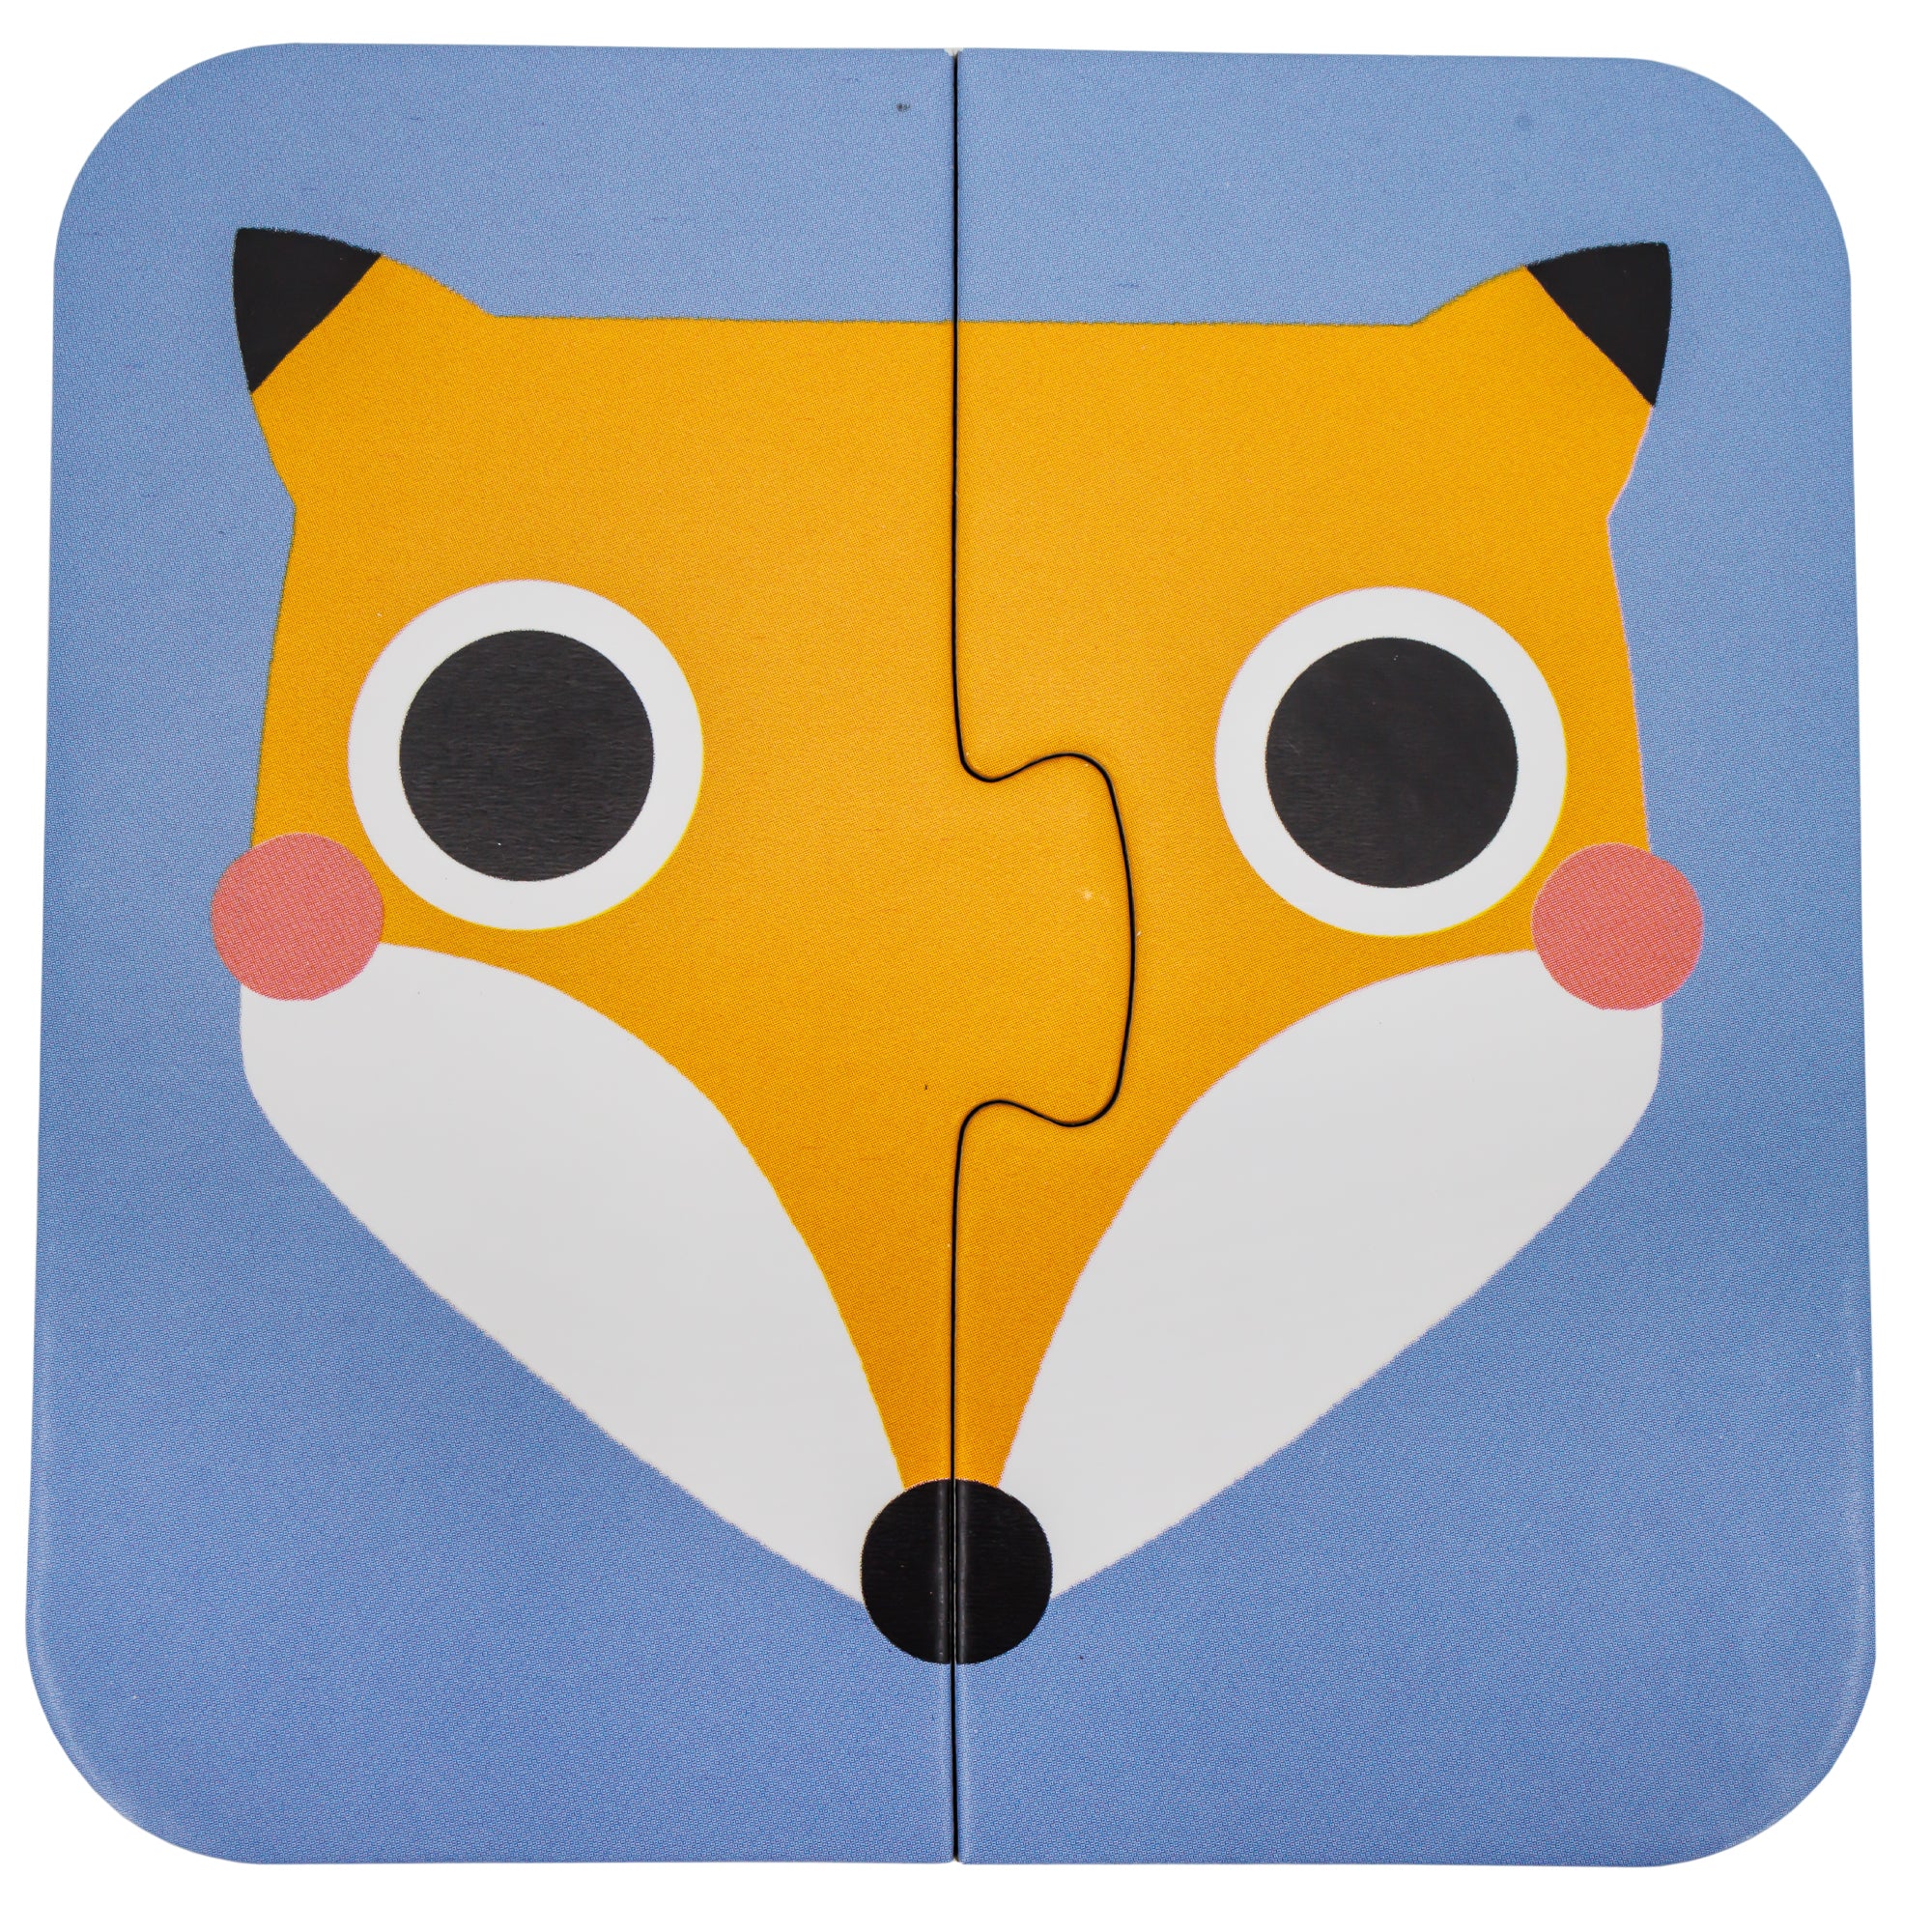 On the Go, Puzzle Halves, Faces puzzle put together. The picture is of a fox on a periwinkle background. The face is orange with white at the bottom and has pink cheeks, wide eyes, and black tips on the ears. There is a seam with a tab down the middle where the puzzle separates.